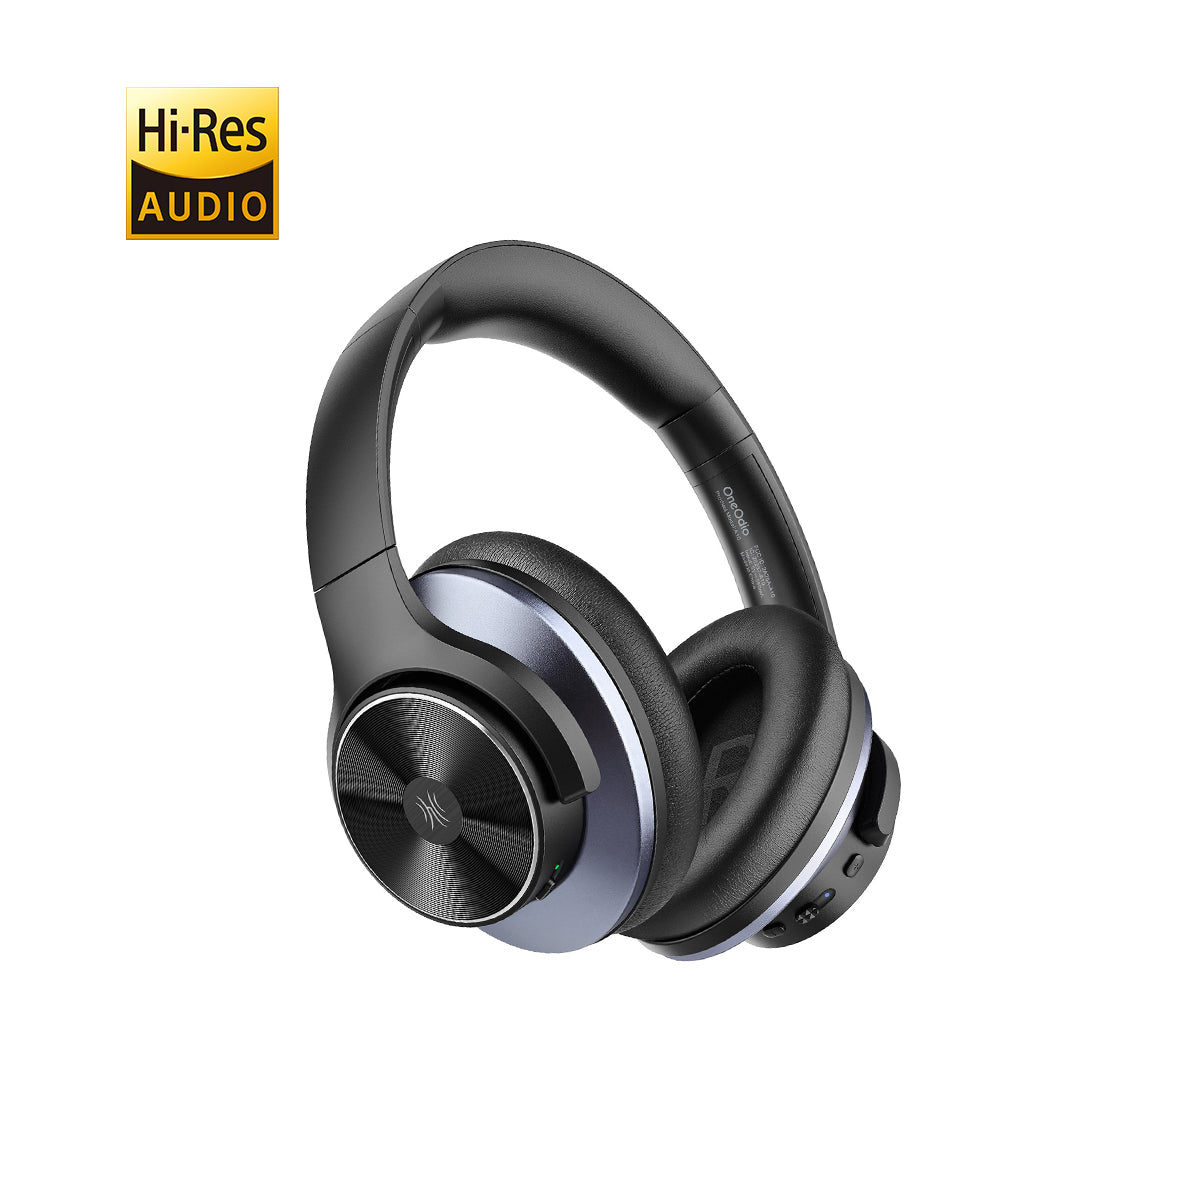 OneOdio A10 Hybrid Active Noise Cancelling Headphones (Silver )